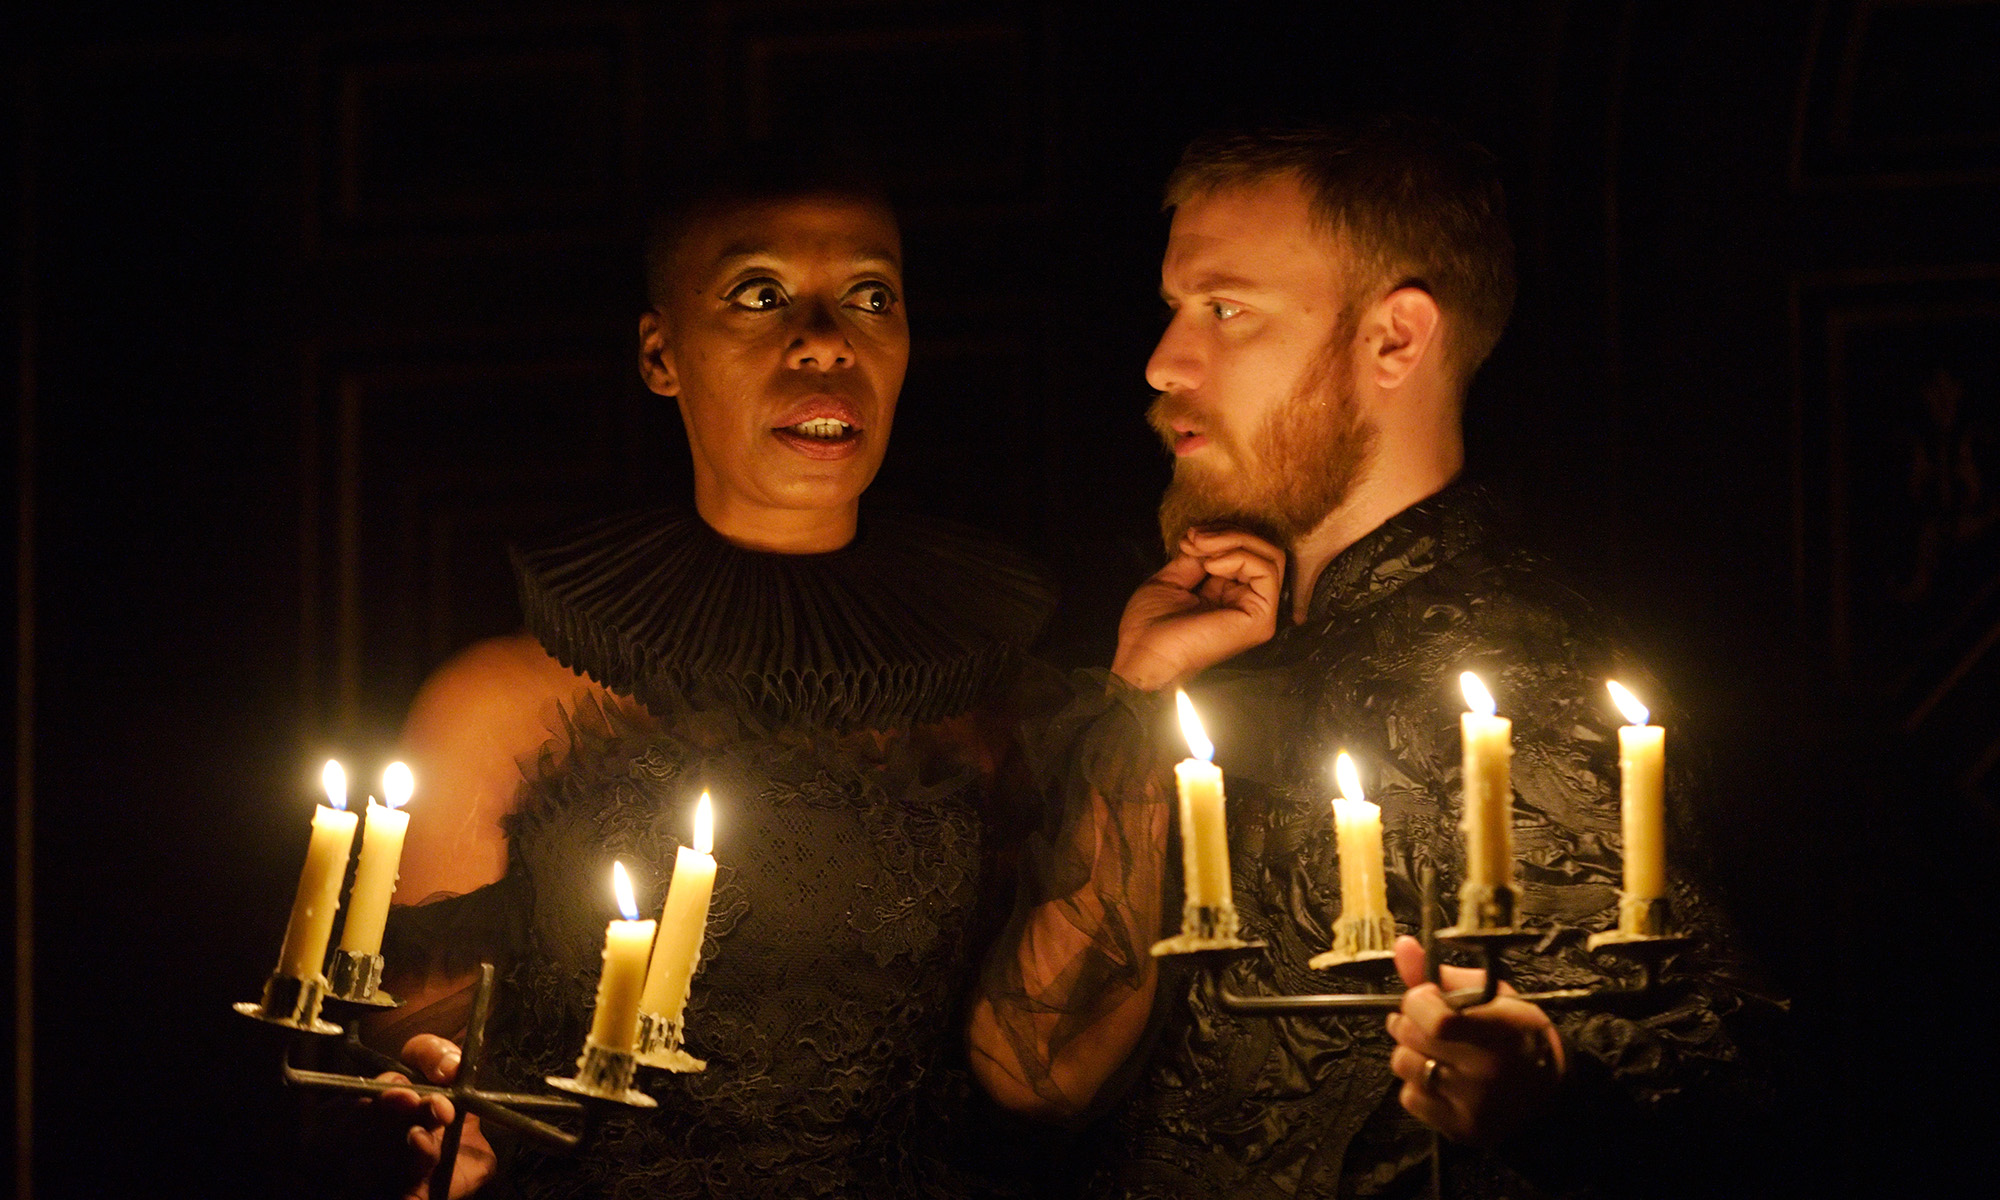 A woman and man stand in the glow of candlelight, the woman's hand touching the man's chin.